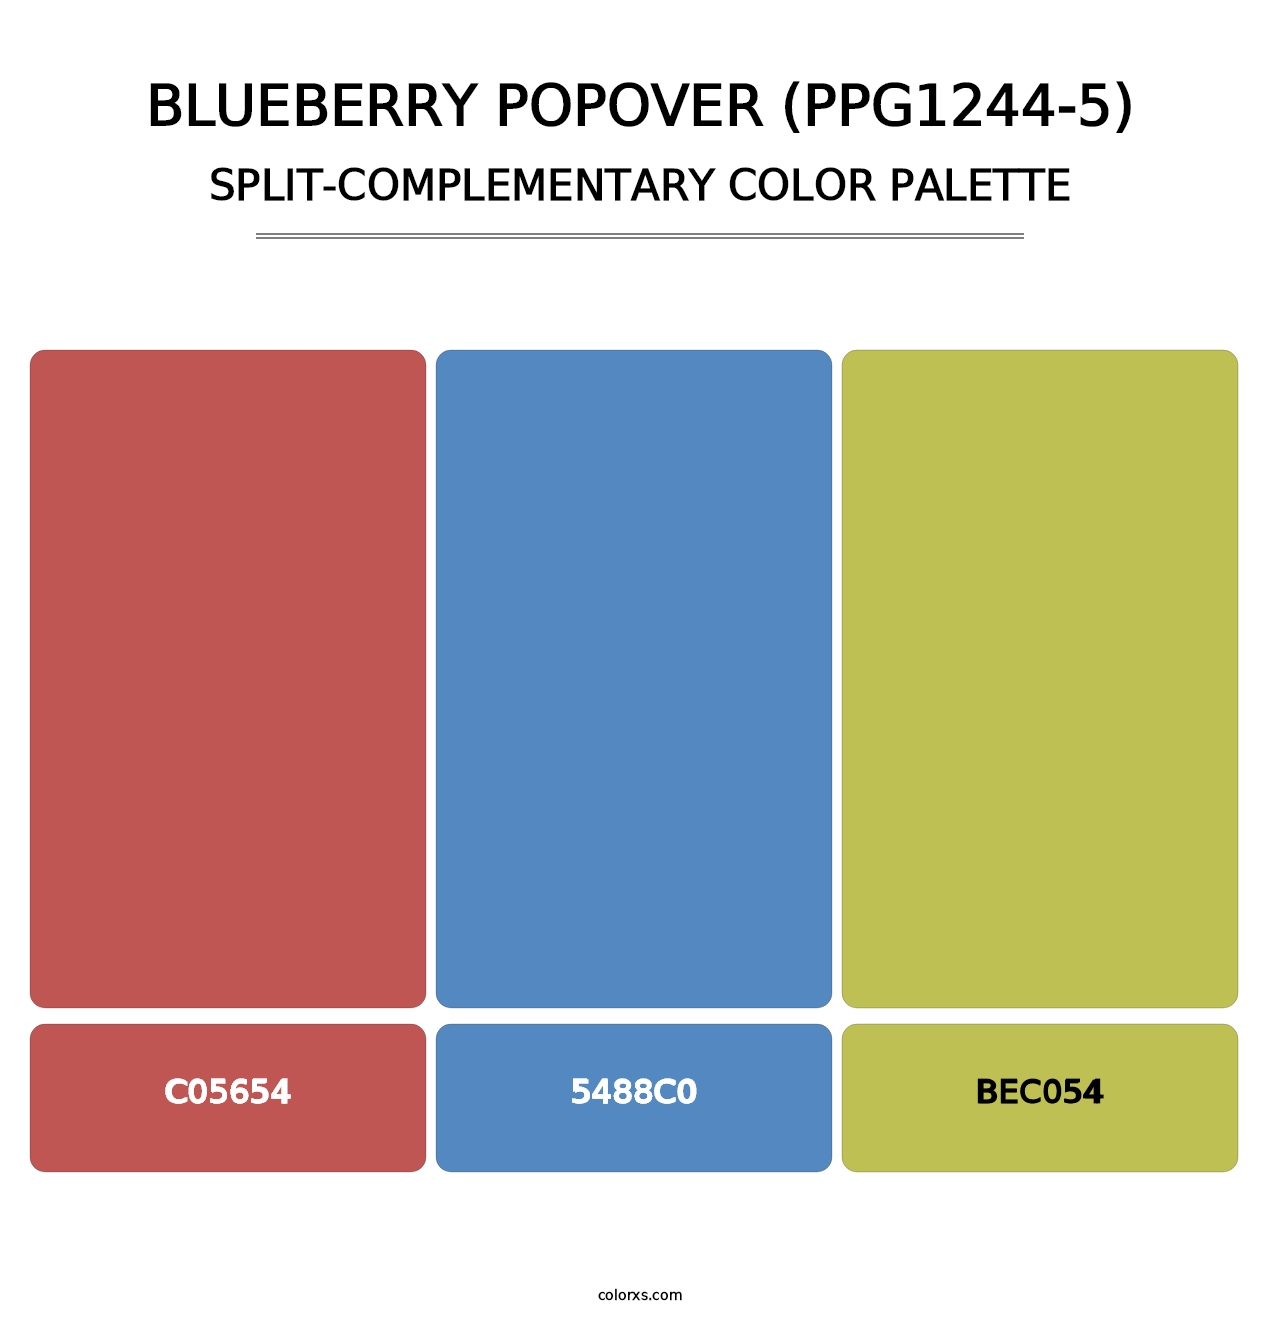 Blueberry Popover (PPG1244-5) - Split-Complementary Color Palette